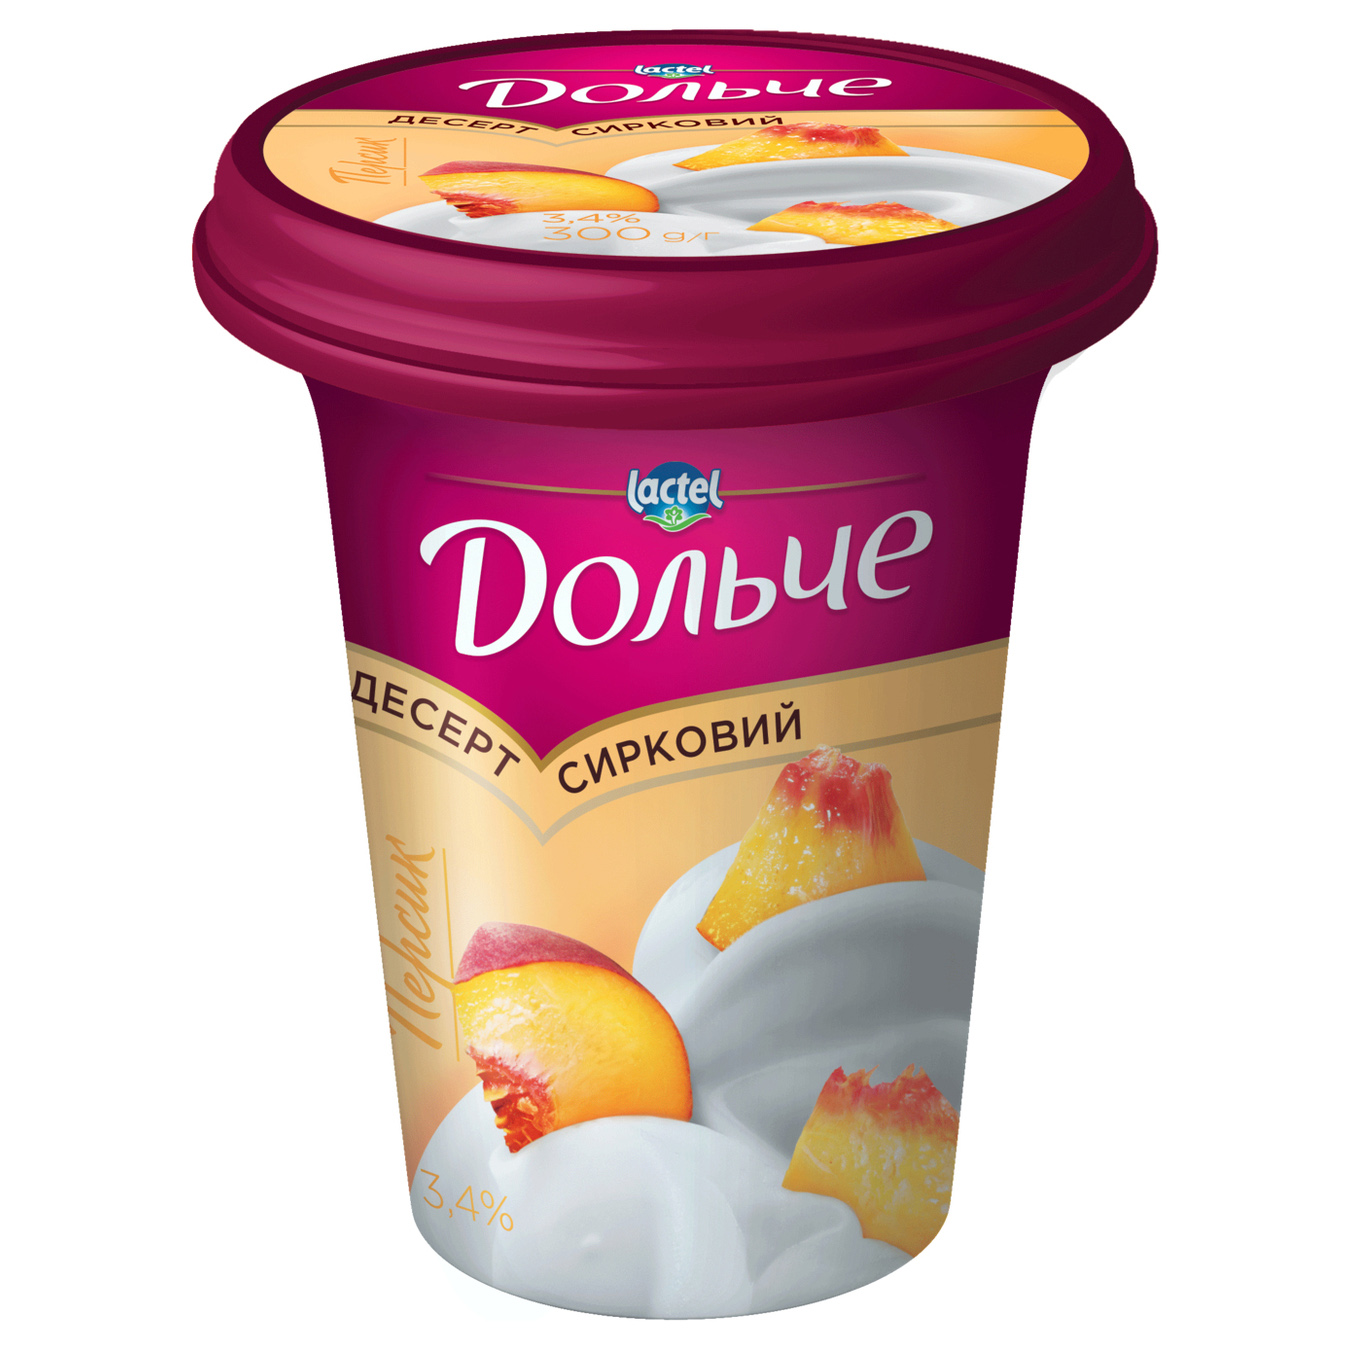 Cheese dessert Dolce with peach filling 3.4% 300g